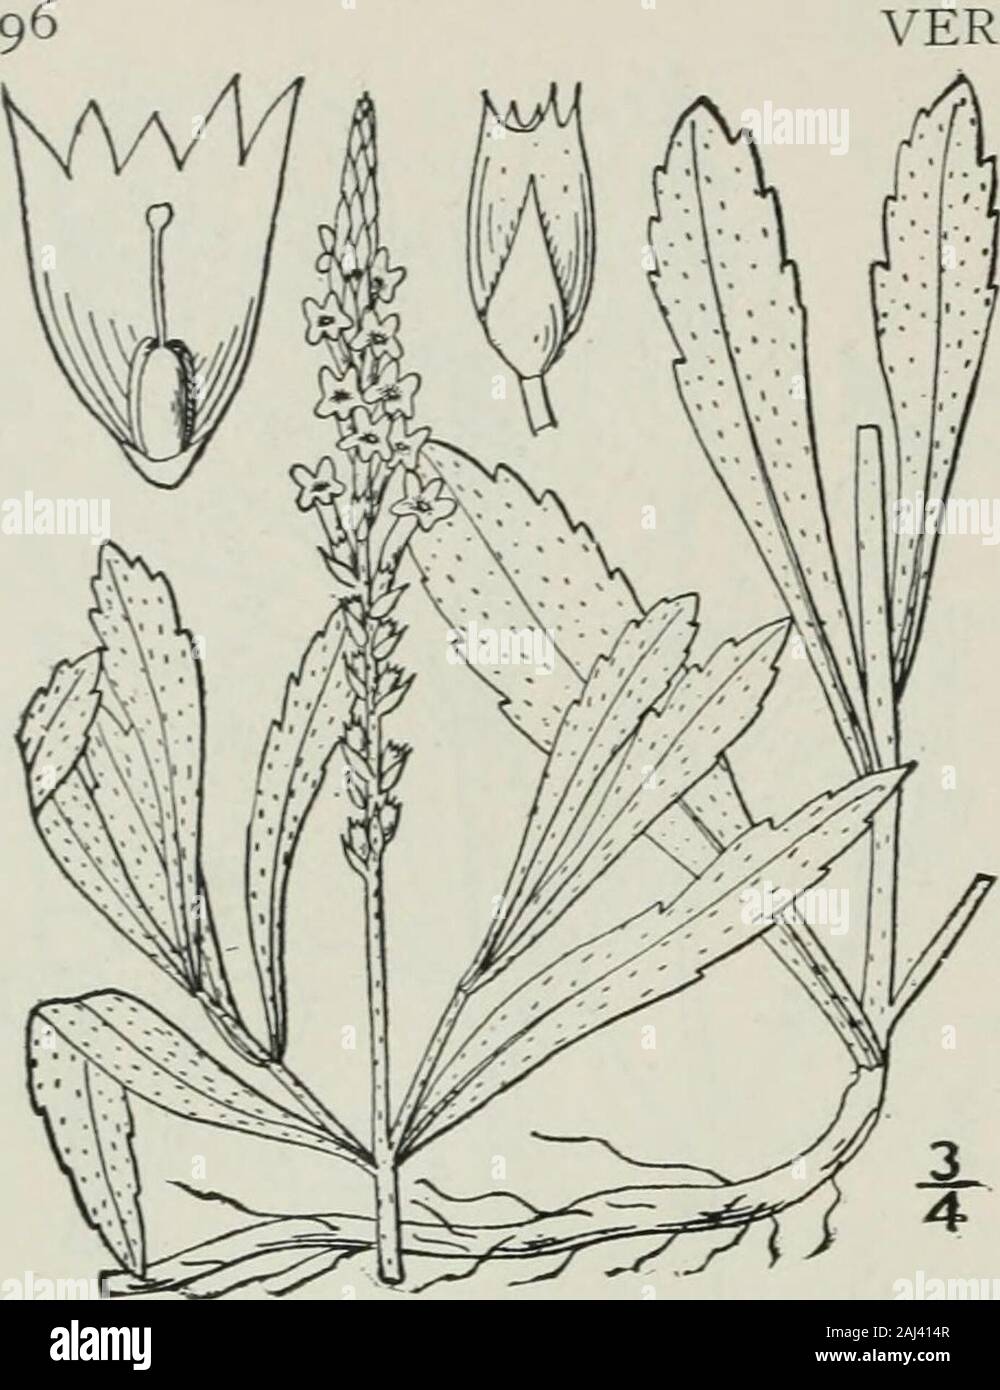 An illustrated flora of the northern United States, Canada and the British possessions : from Newfoundland to the parallel of the southern boundary of Virginia and from the Atlantic Ocean westward to the 102nd meridian . VERBENACEAE. Vol. III. 4. Verbena angustifolia ]Iichx. Narrow-leaved Vervain. Fig, 3555. V. angustifolia Michx. Fl. Bor. Am. 2: 14. 1803. Perennial, roughish-puberulent or pubescent;stem slender, simple or branched, 4-sided above,i°-2° high. Leaves linear, spatulate or lanceo-late, obtuse or subacute at the apex, cuneate atthe base and tapering into short petioles, serrateor Stock Photo